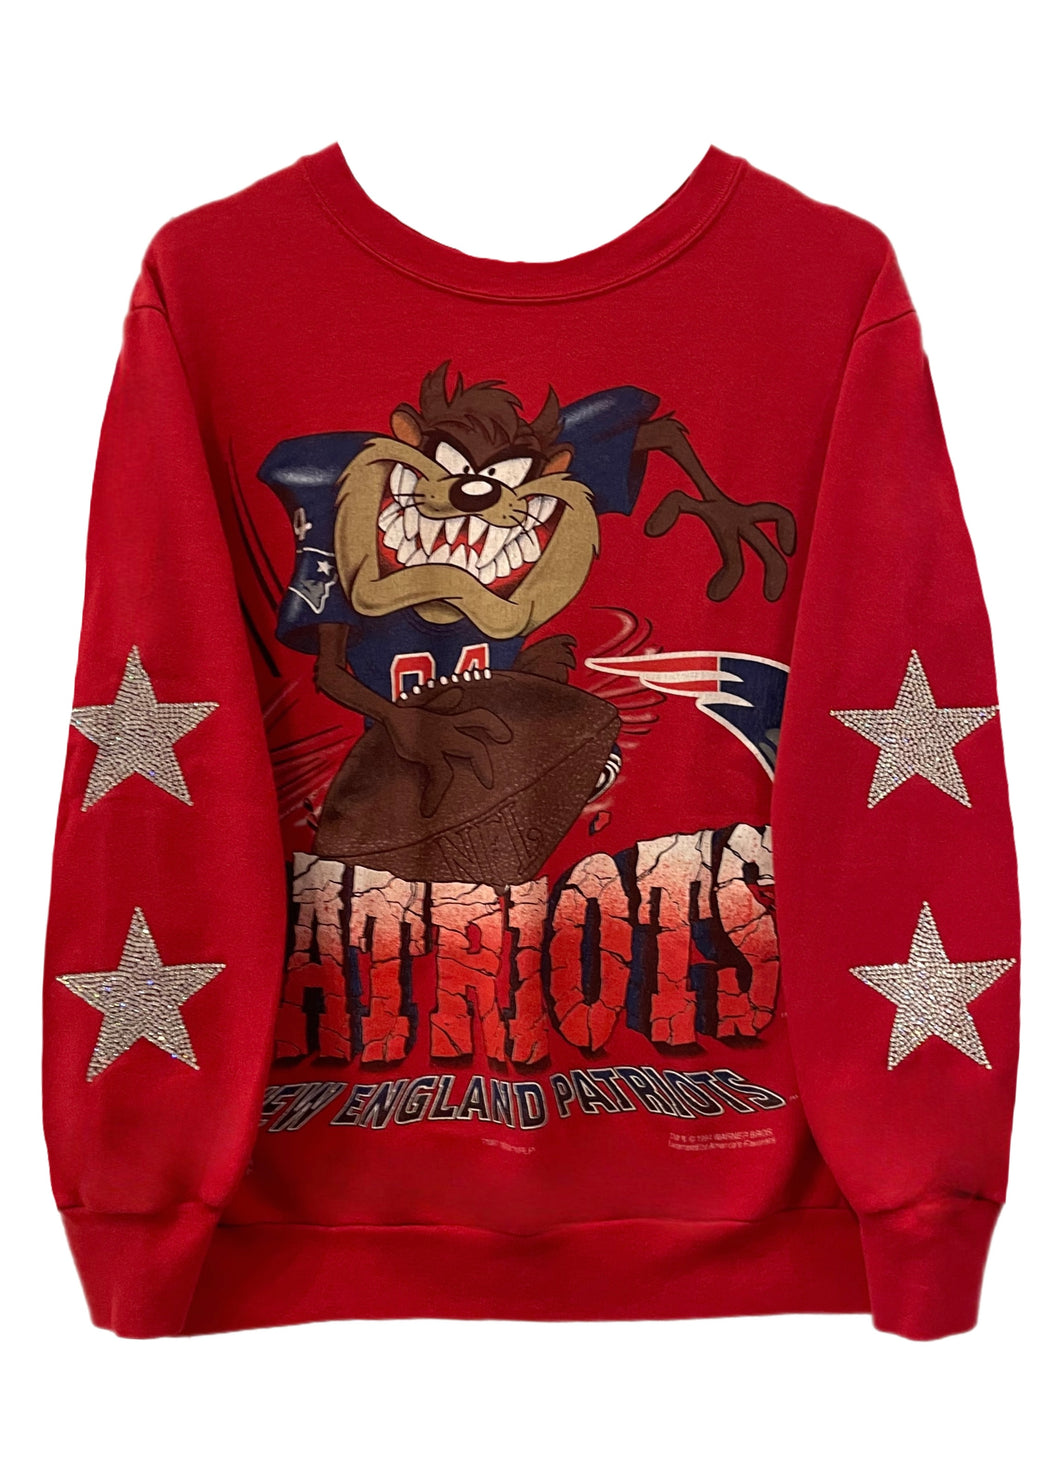 New England Patriots, NFL “Rare Find” One of a KIND Vintage Sweatshirt with Crystal Star Design